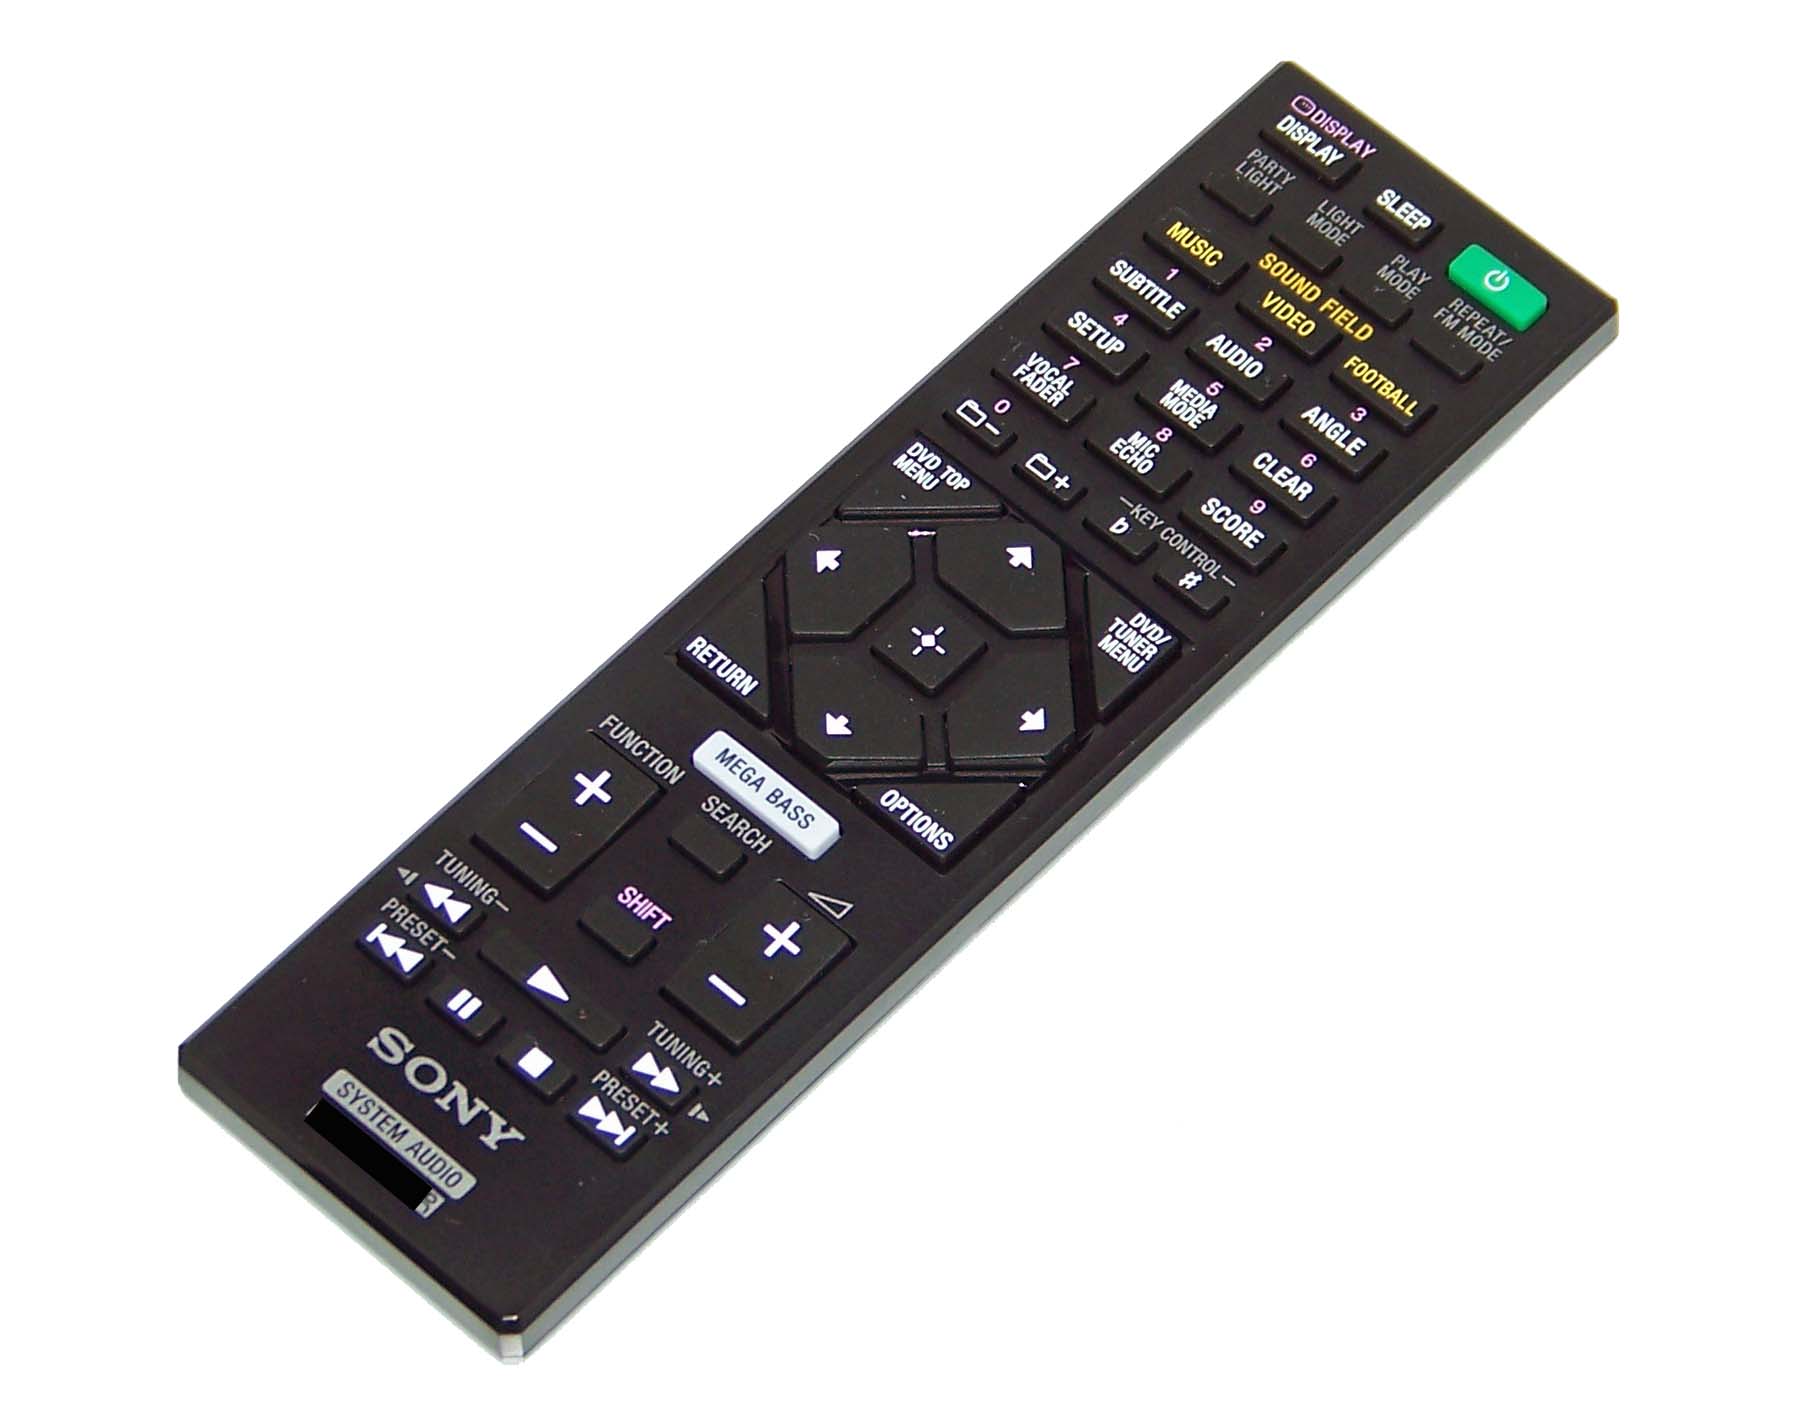 Sony OEM NEW Sony Remote Control Originally Shipped With SHAKEX70D, SHAKE-X70D